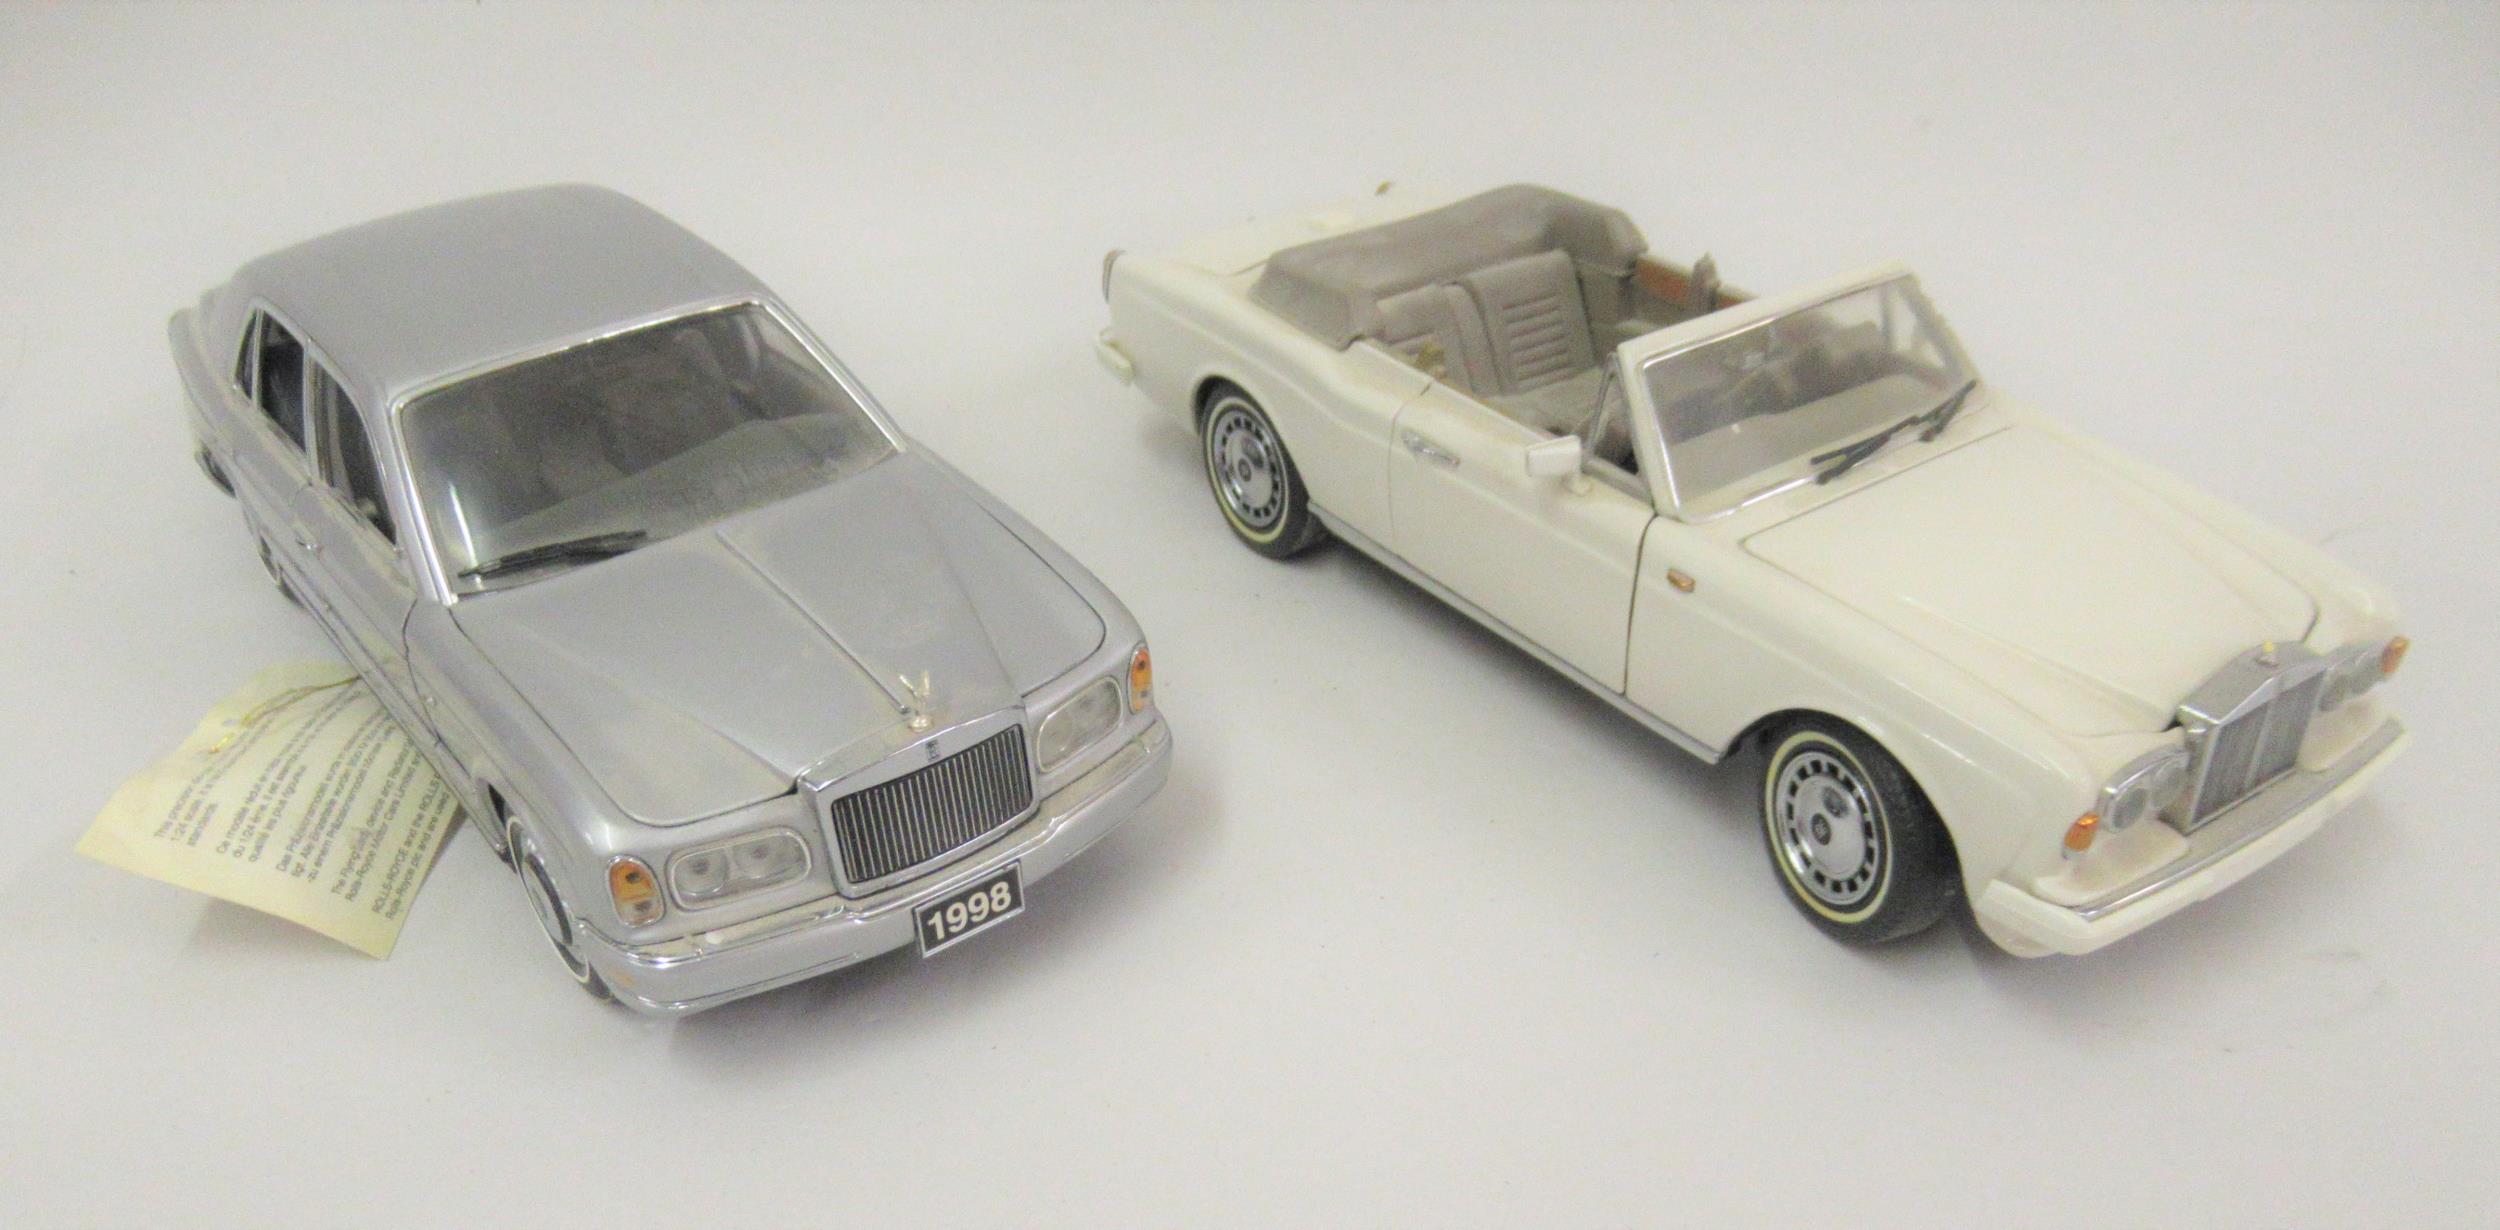 Franklin Mint 1:24 scale Rolls Royce Silver Seraph, with original packaging and another of a 1992